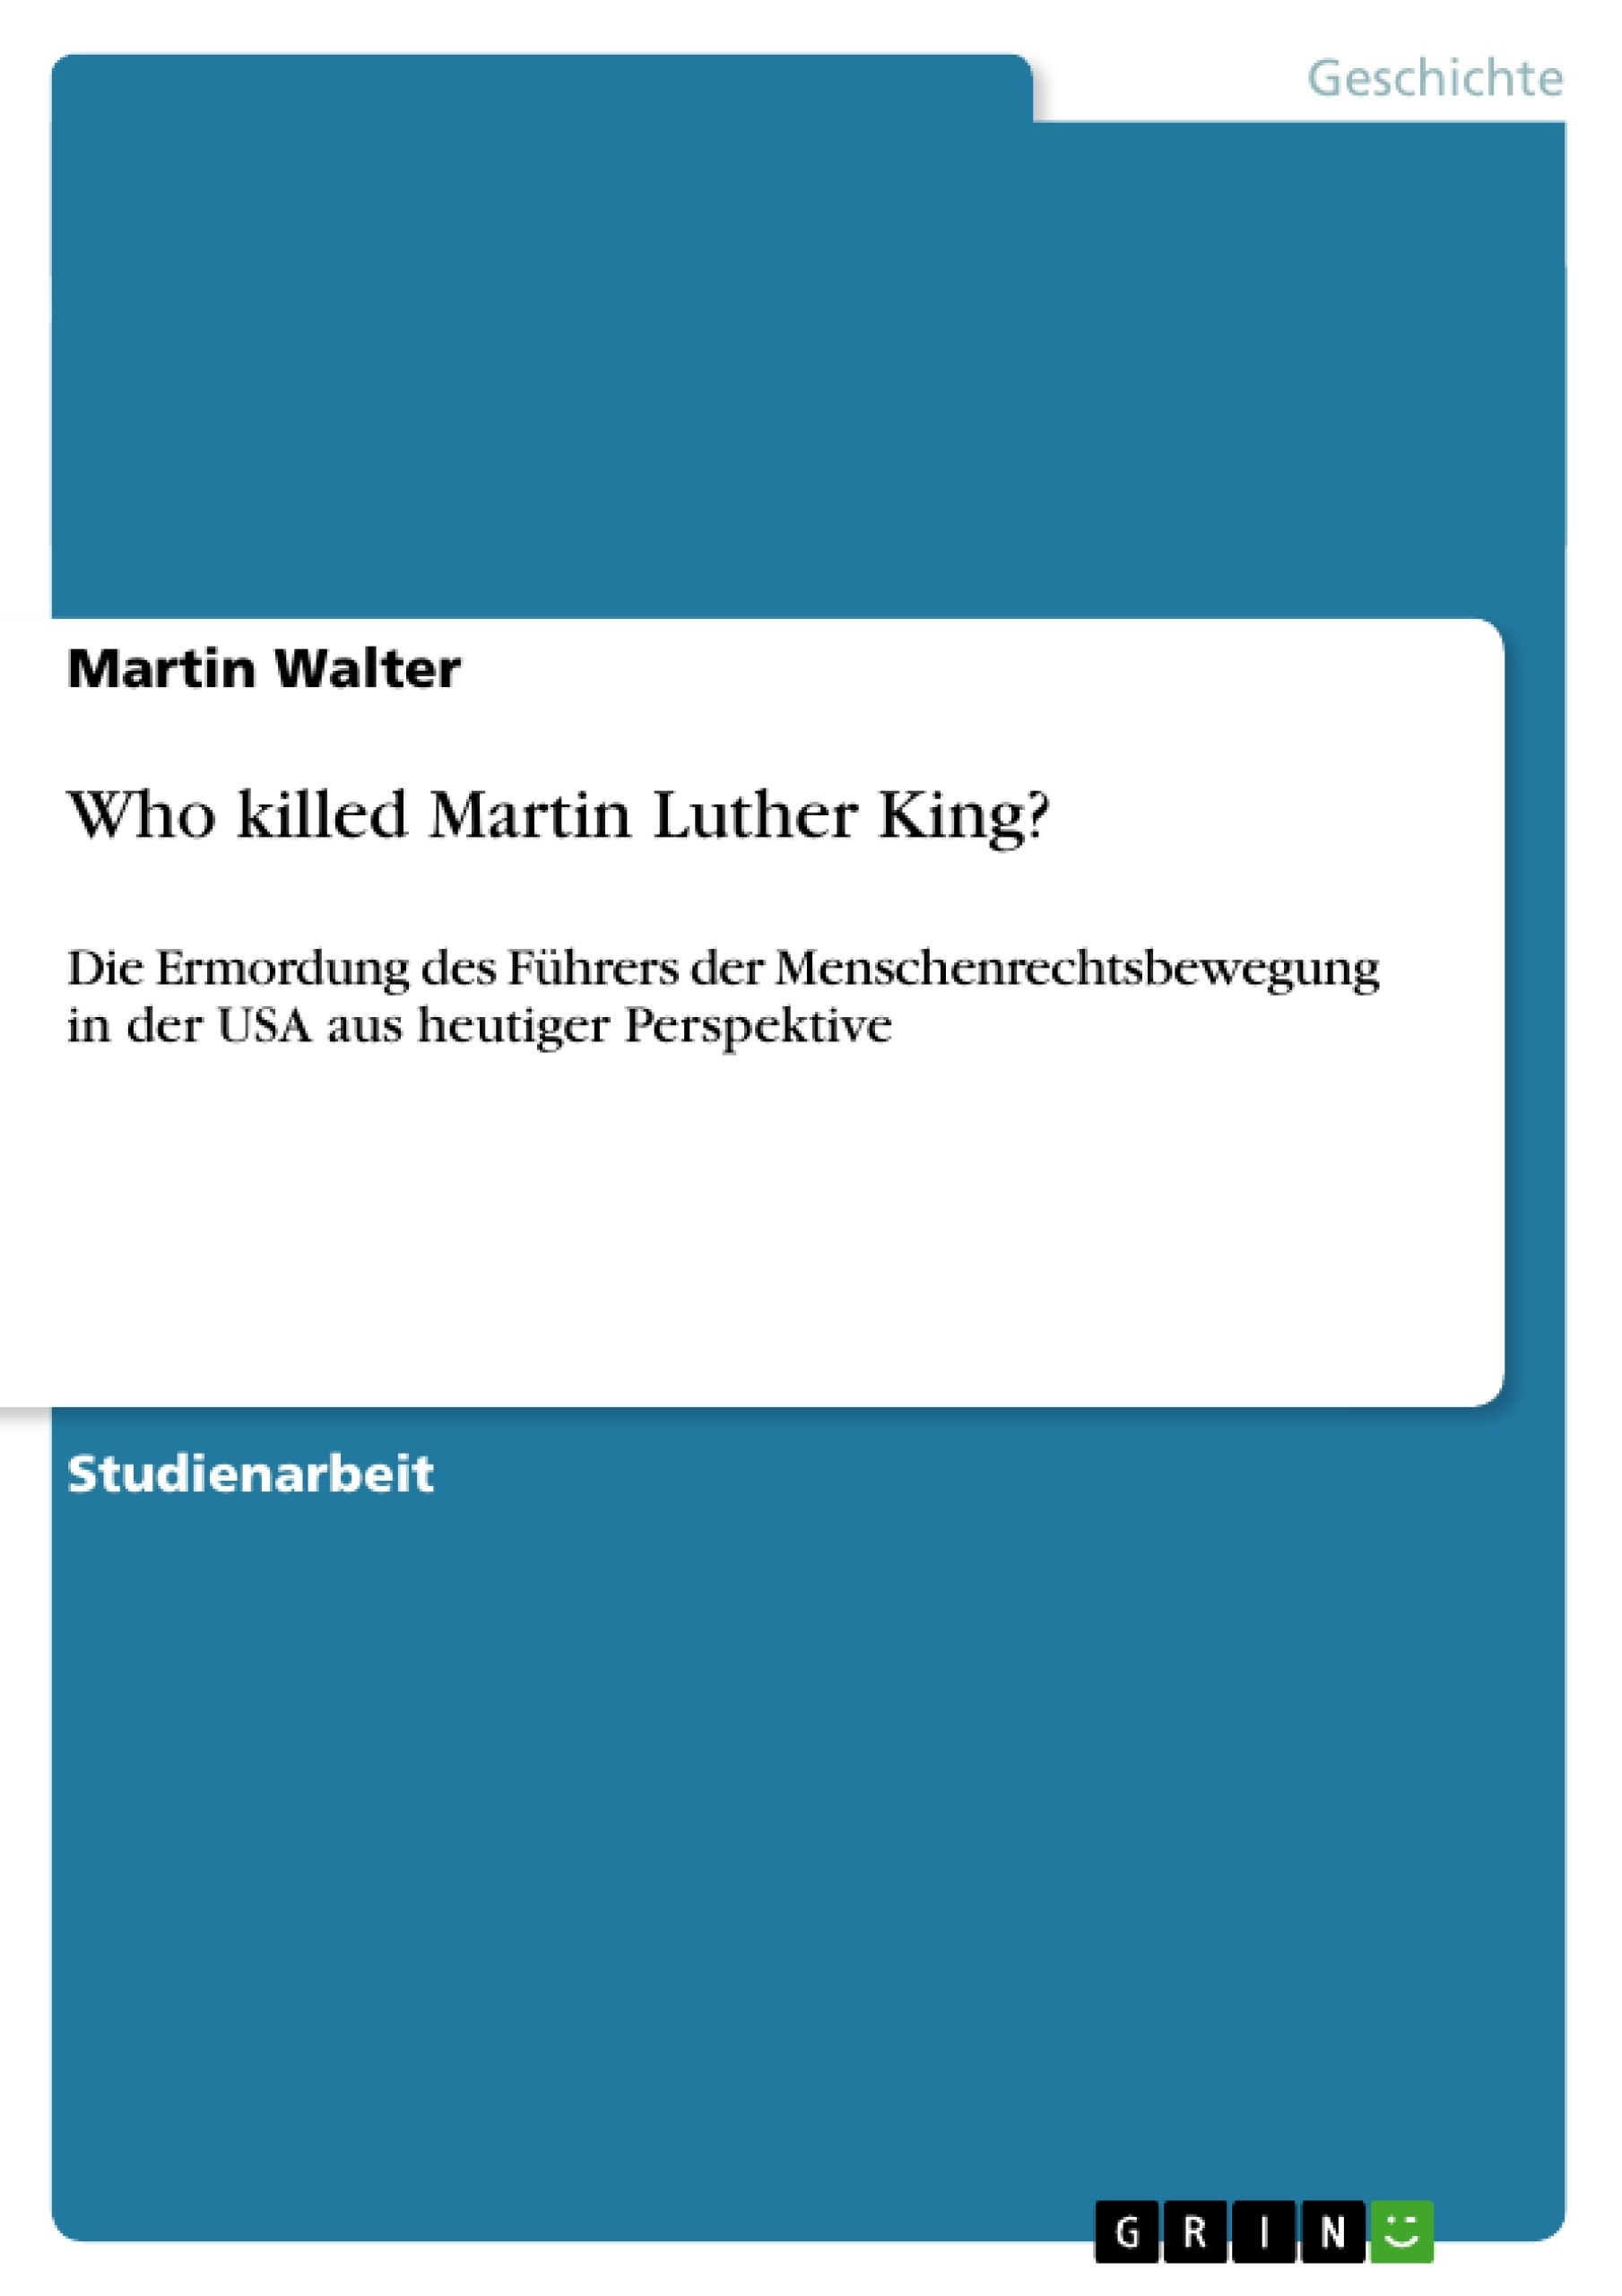 Título: Who killed Martin Luther King?